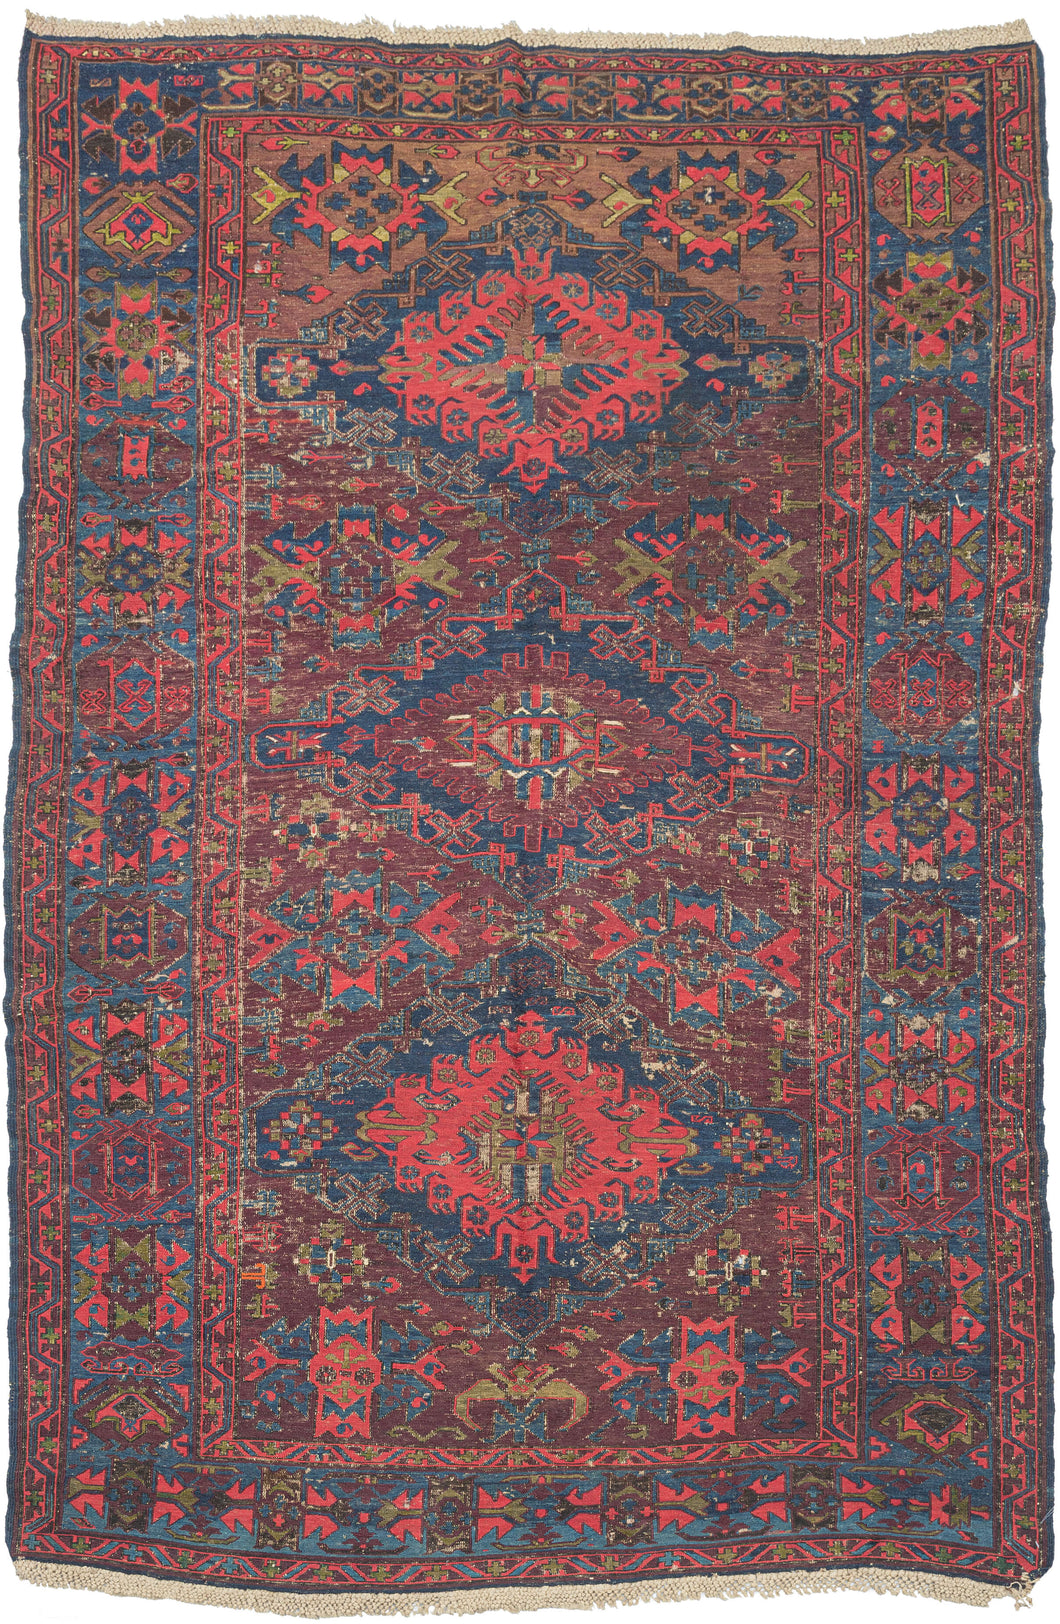 This Soumak features three powerful medallions on an undulating aubergine field. The rest of the palette is composed of vibrant tones of red, cobalt, and hunter-green.  The main border is composed of abstracted palmettes. Nicely finished with the original braided wool fringe.